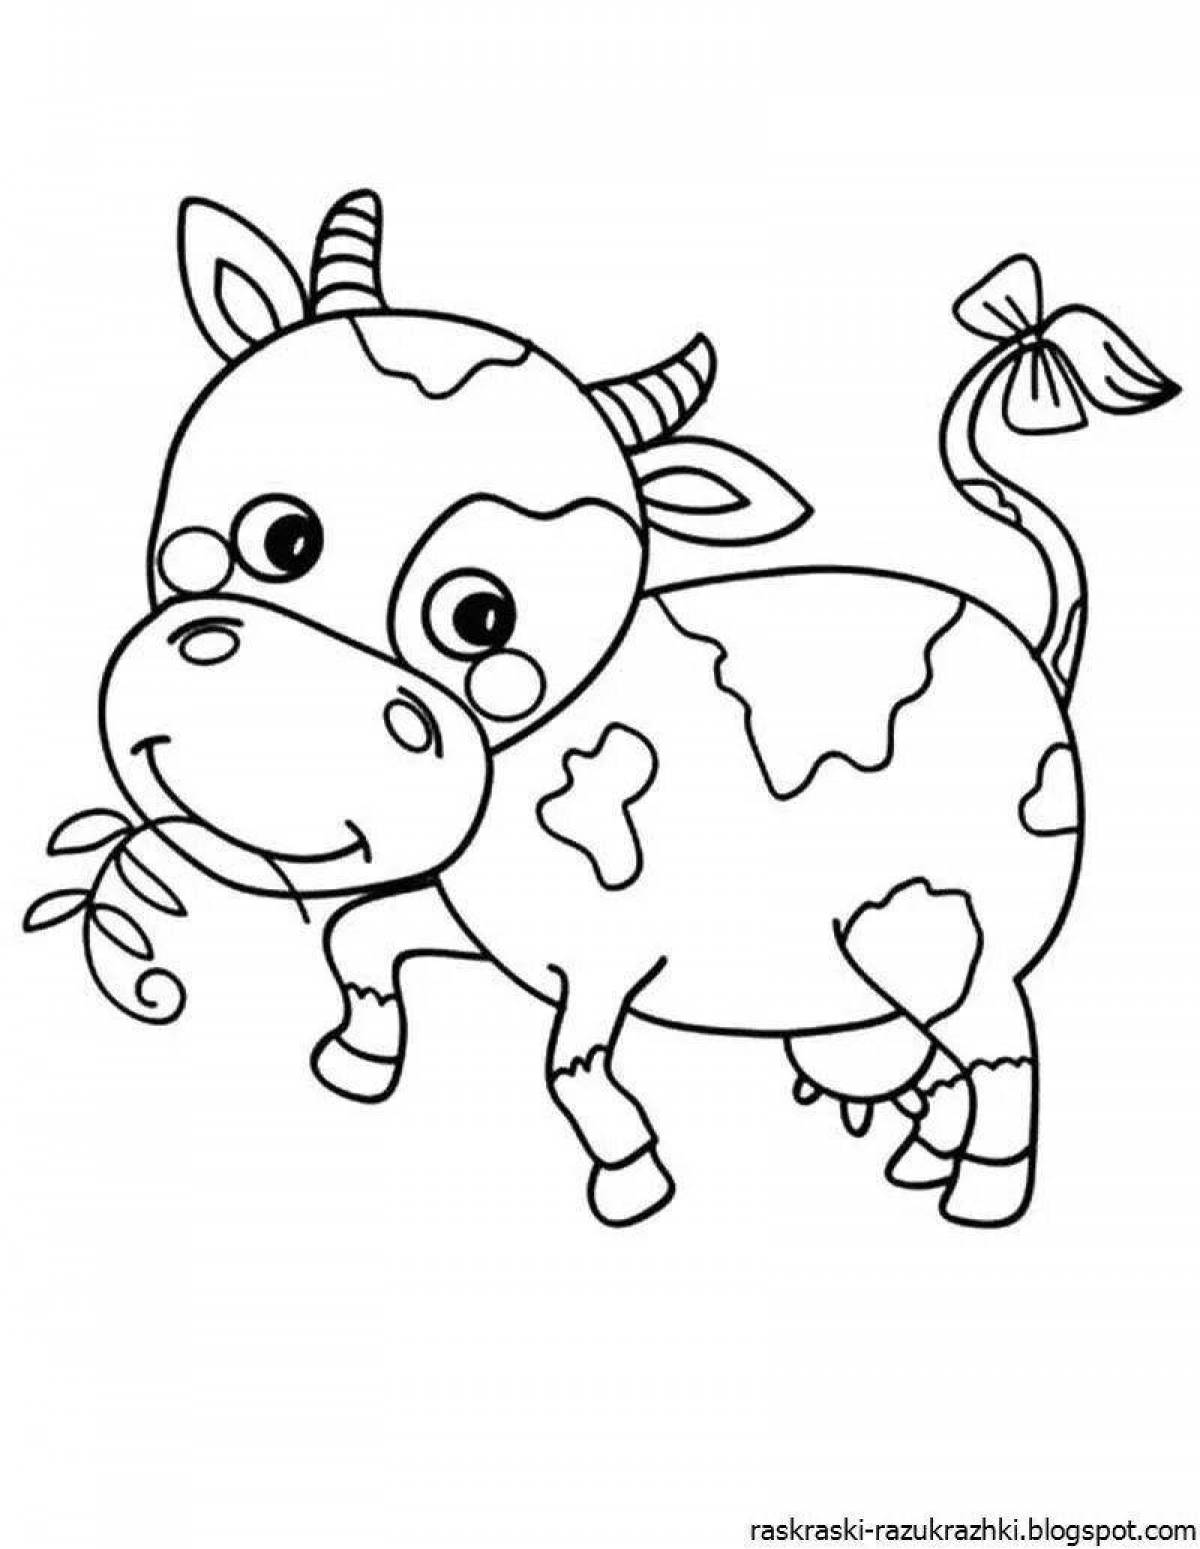 Bright drawing of a cow